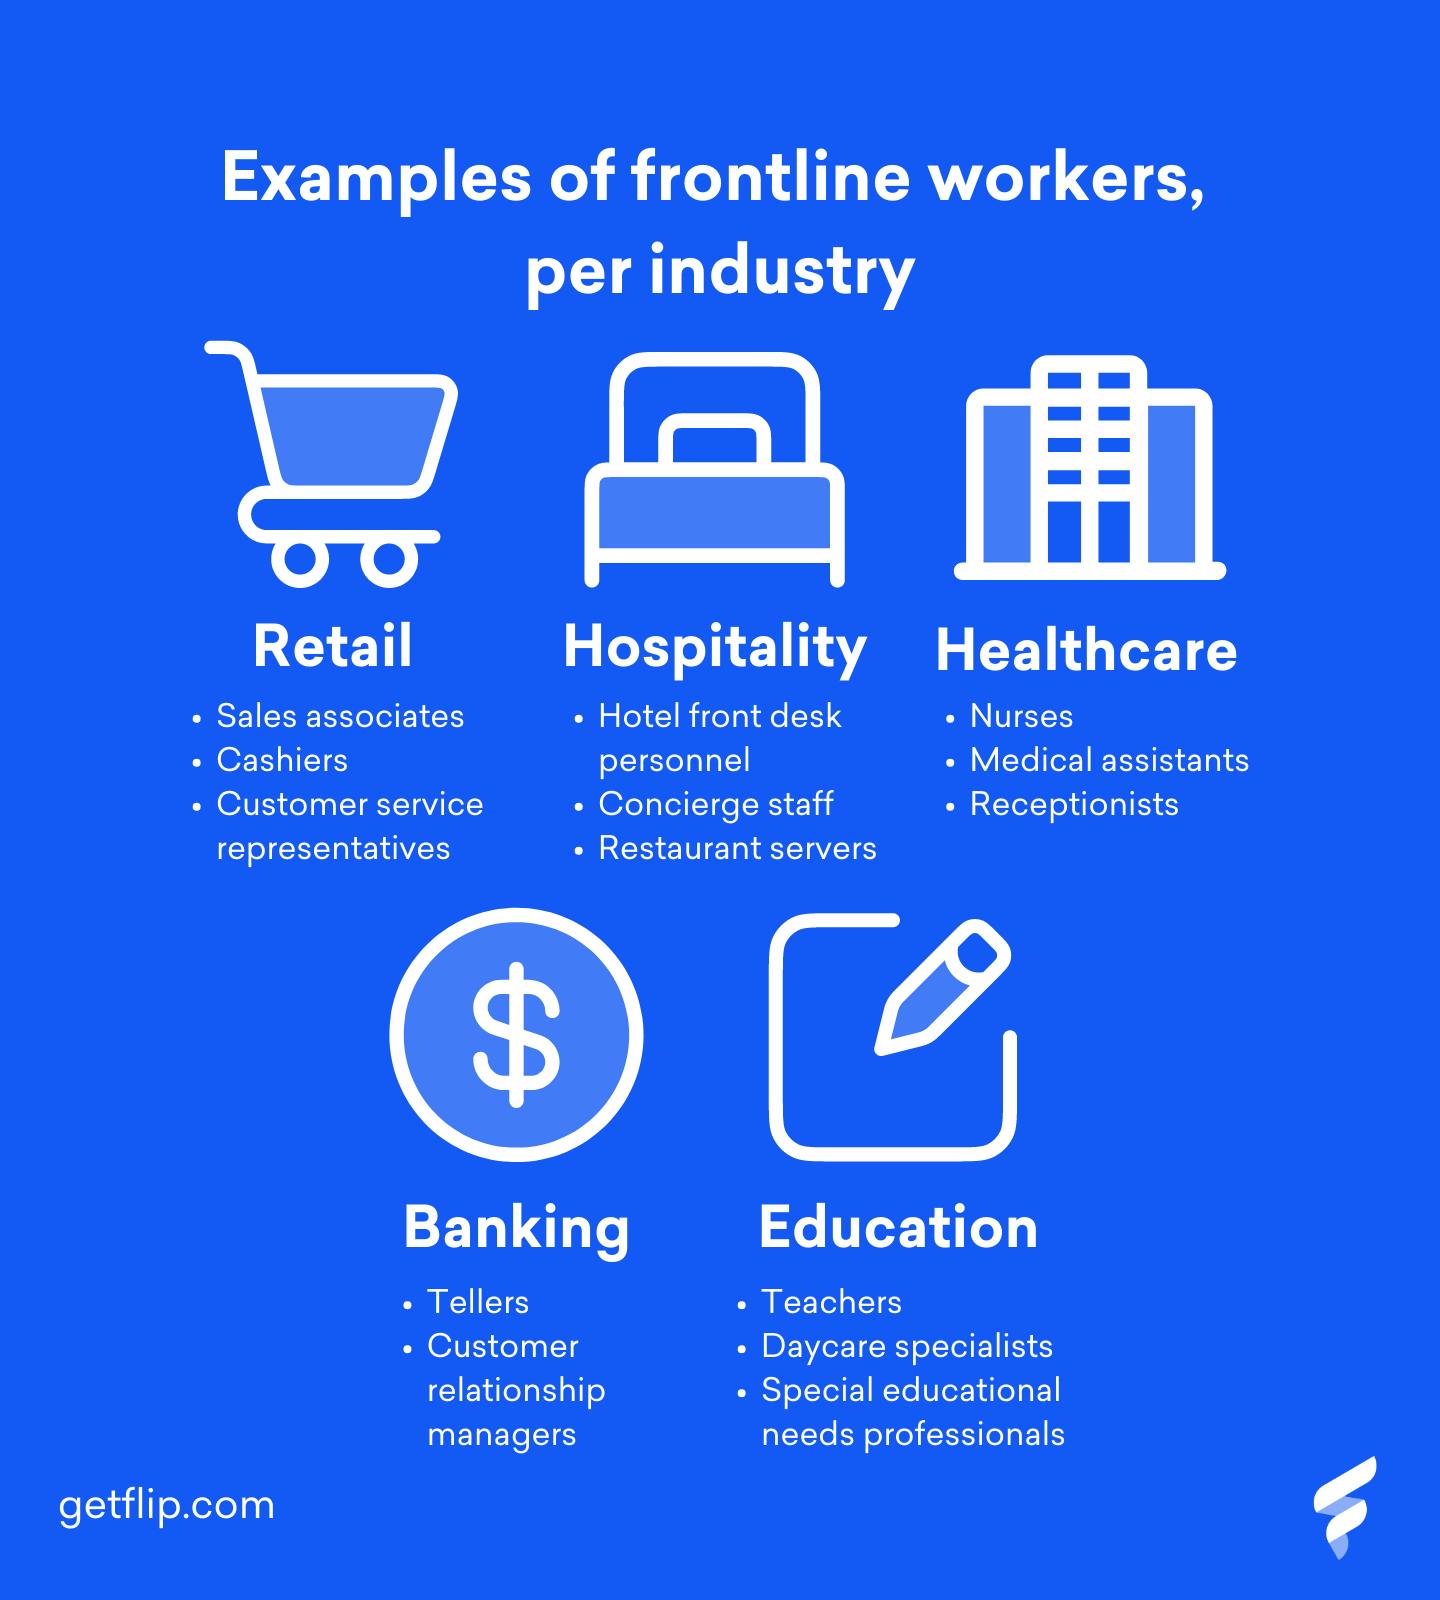 A Visual portraying different frontline workers and their industry